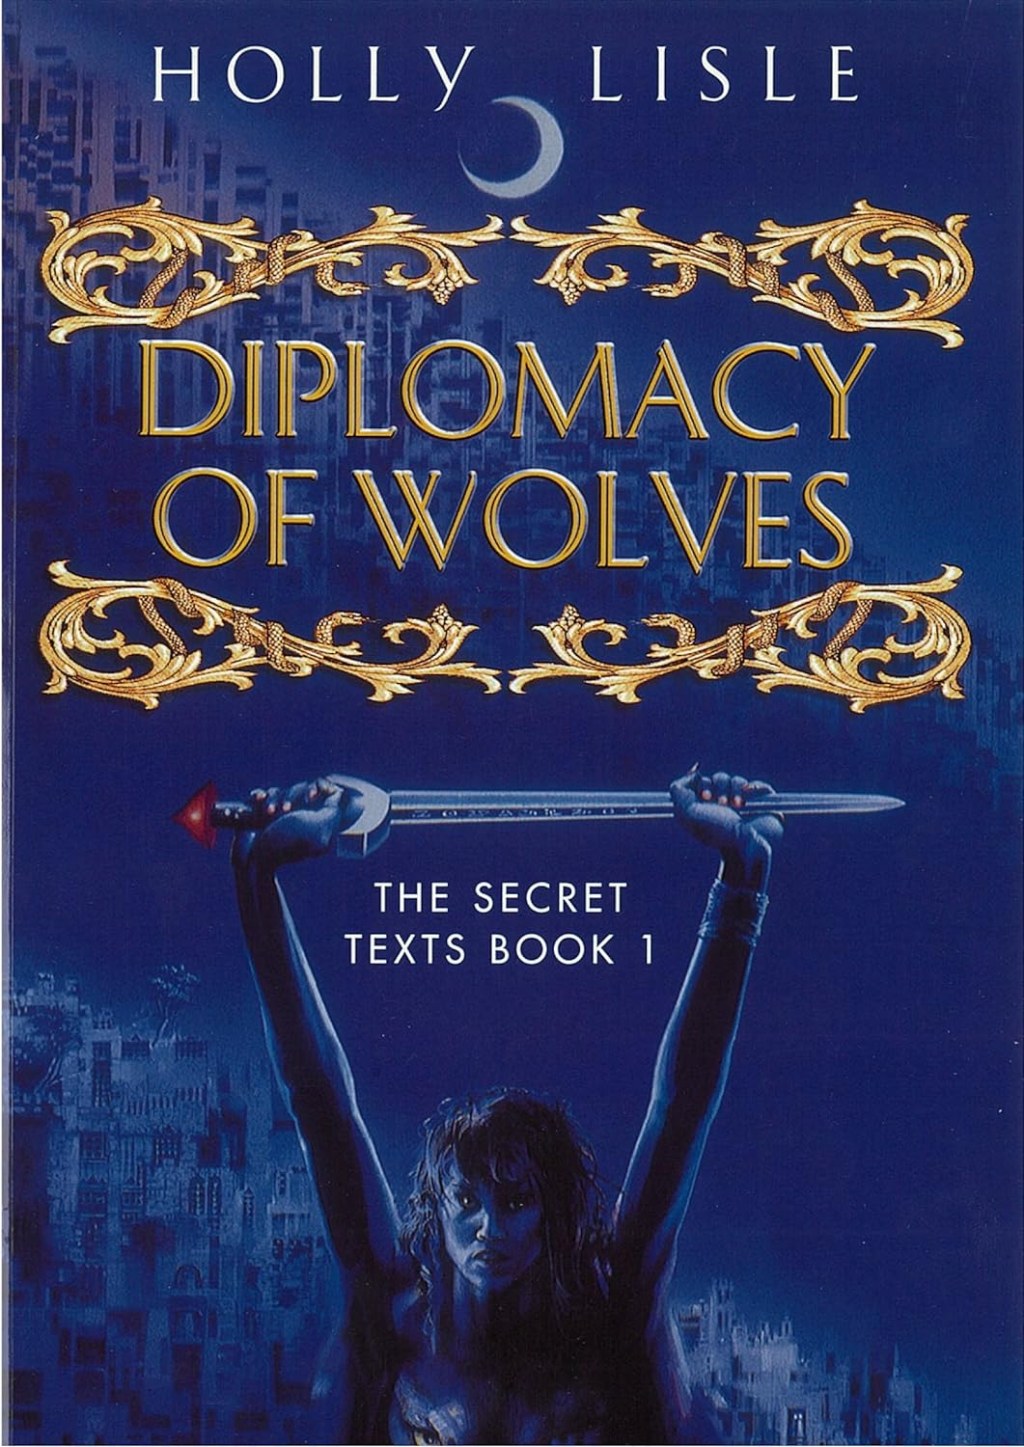 diplomacy of wolves - Amazon.com: Diplomacy Of Wolves (Secret Texts S